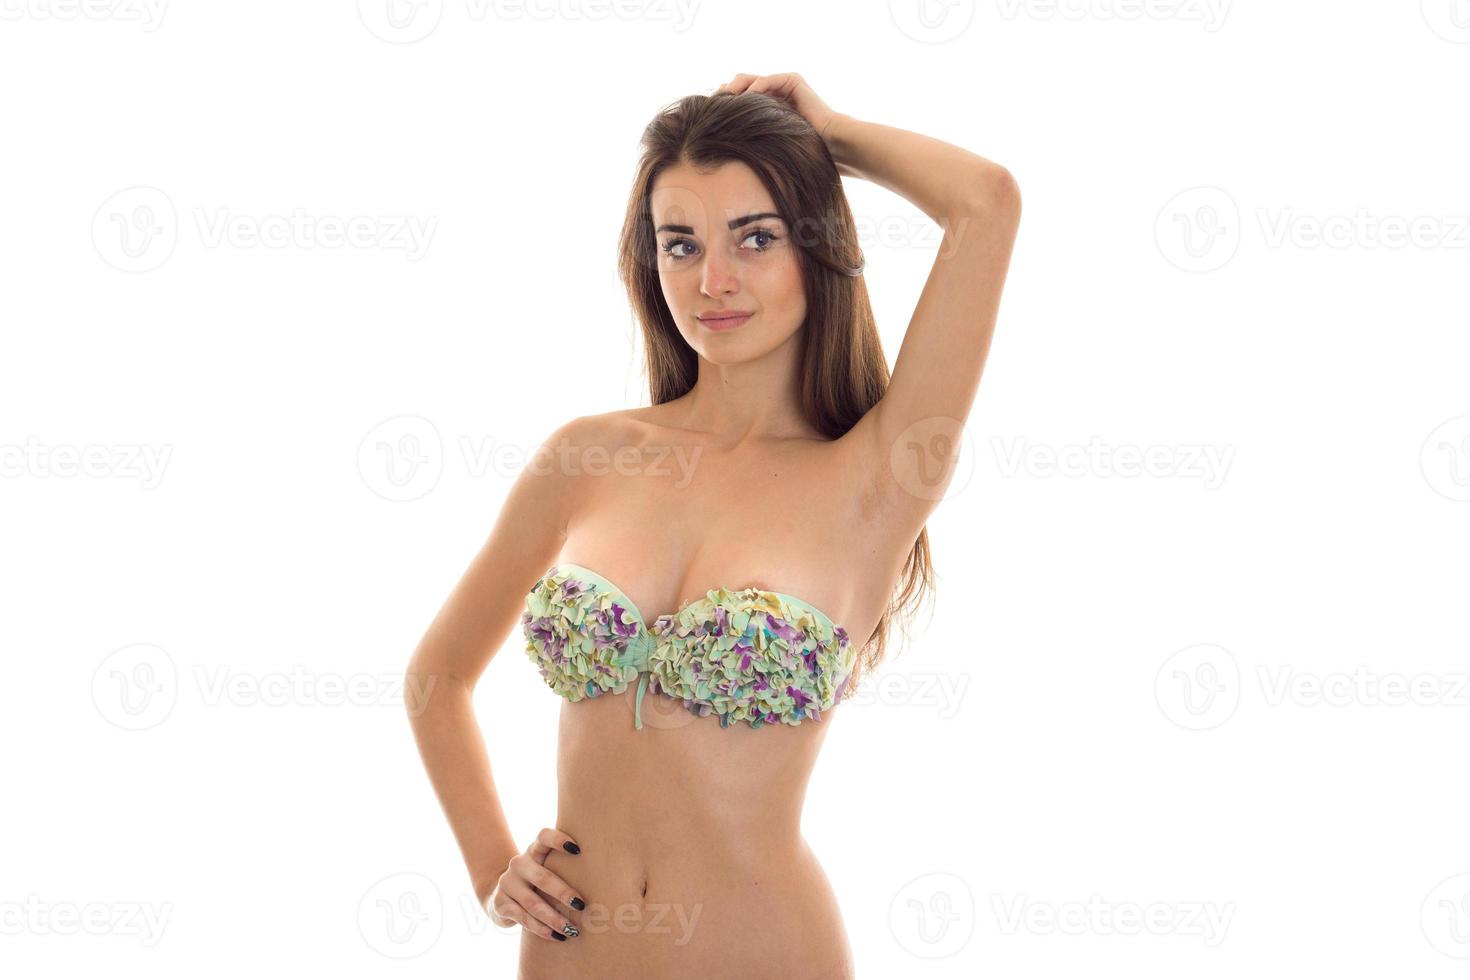 https://static.vecteezy.com/system/resources/previews/016/100/445/non_2x/young-beautiful-girl-with-sexual-breasts-in-bathing-suit-holding-a-hand-near-the-hair-and-looking-at-camera-photo.jpg